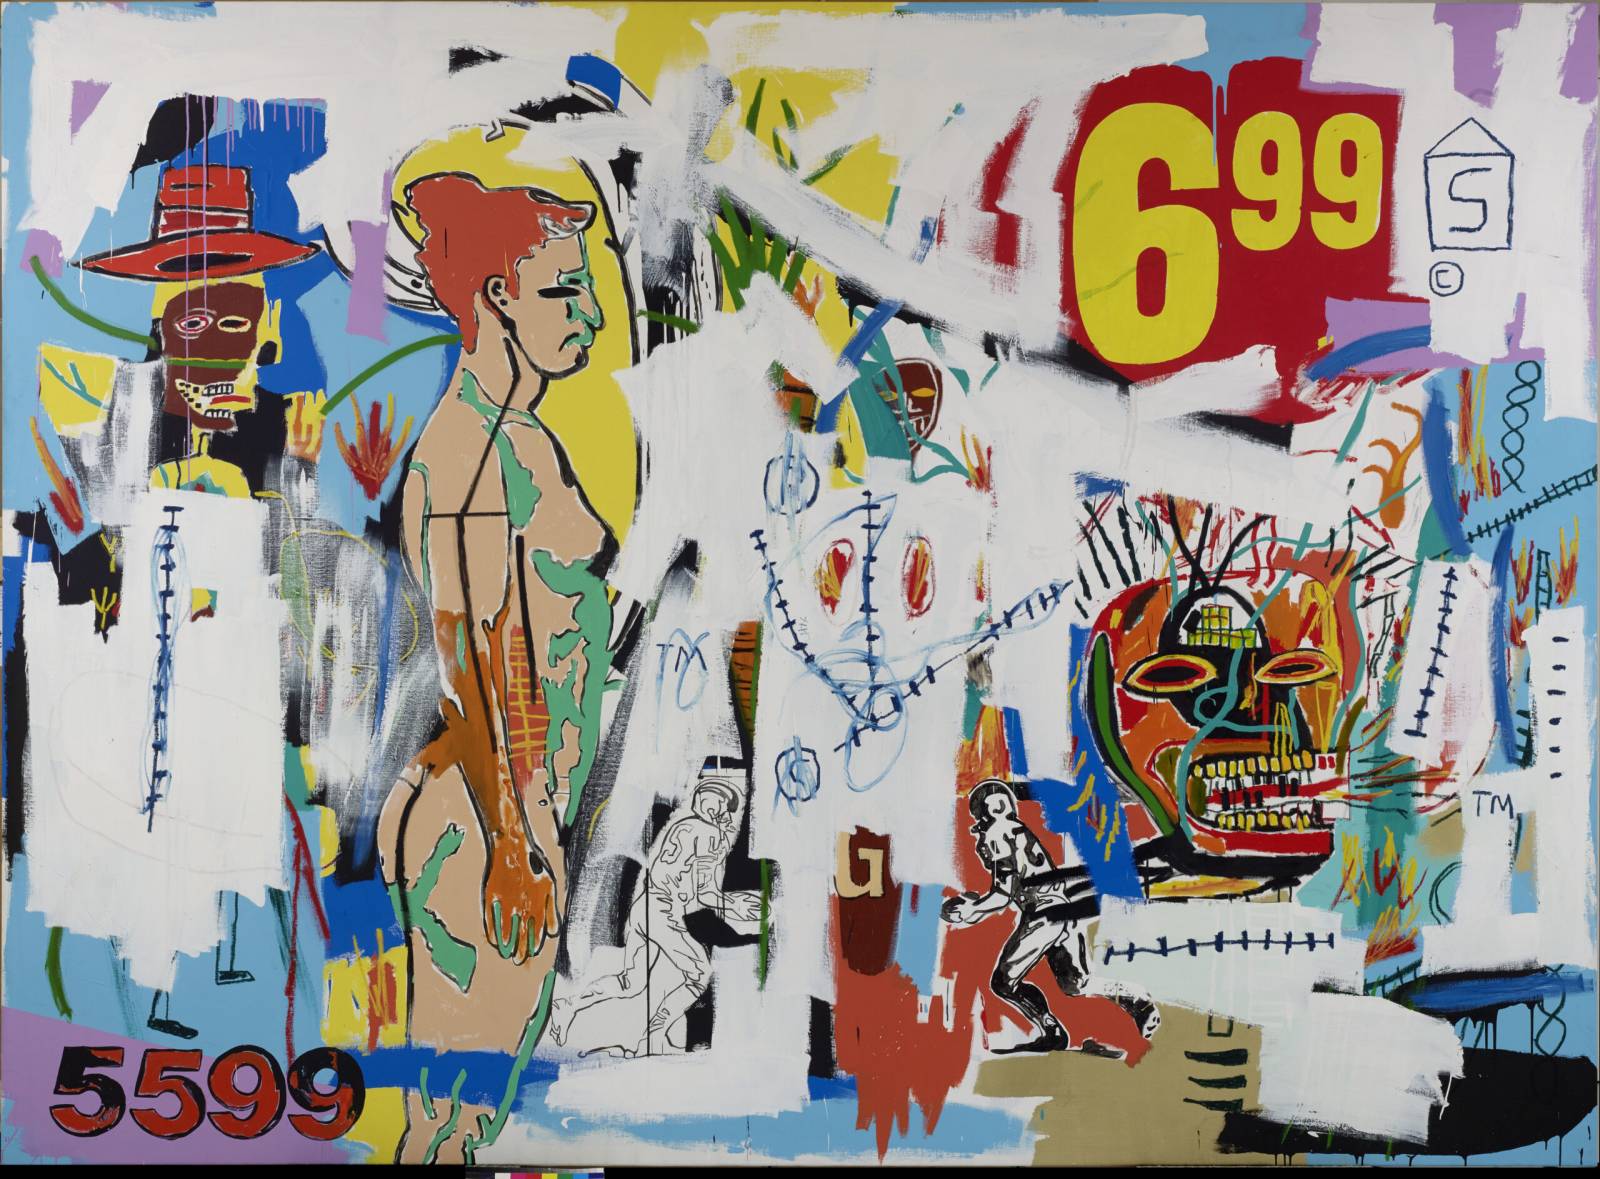 © The Andy Warhol Foundation for the Visual Arts, Inc., © Estate of Jean-Michel Basquiat. Licensed by Artestar, New York